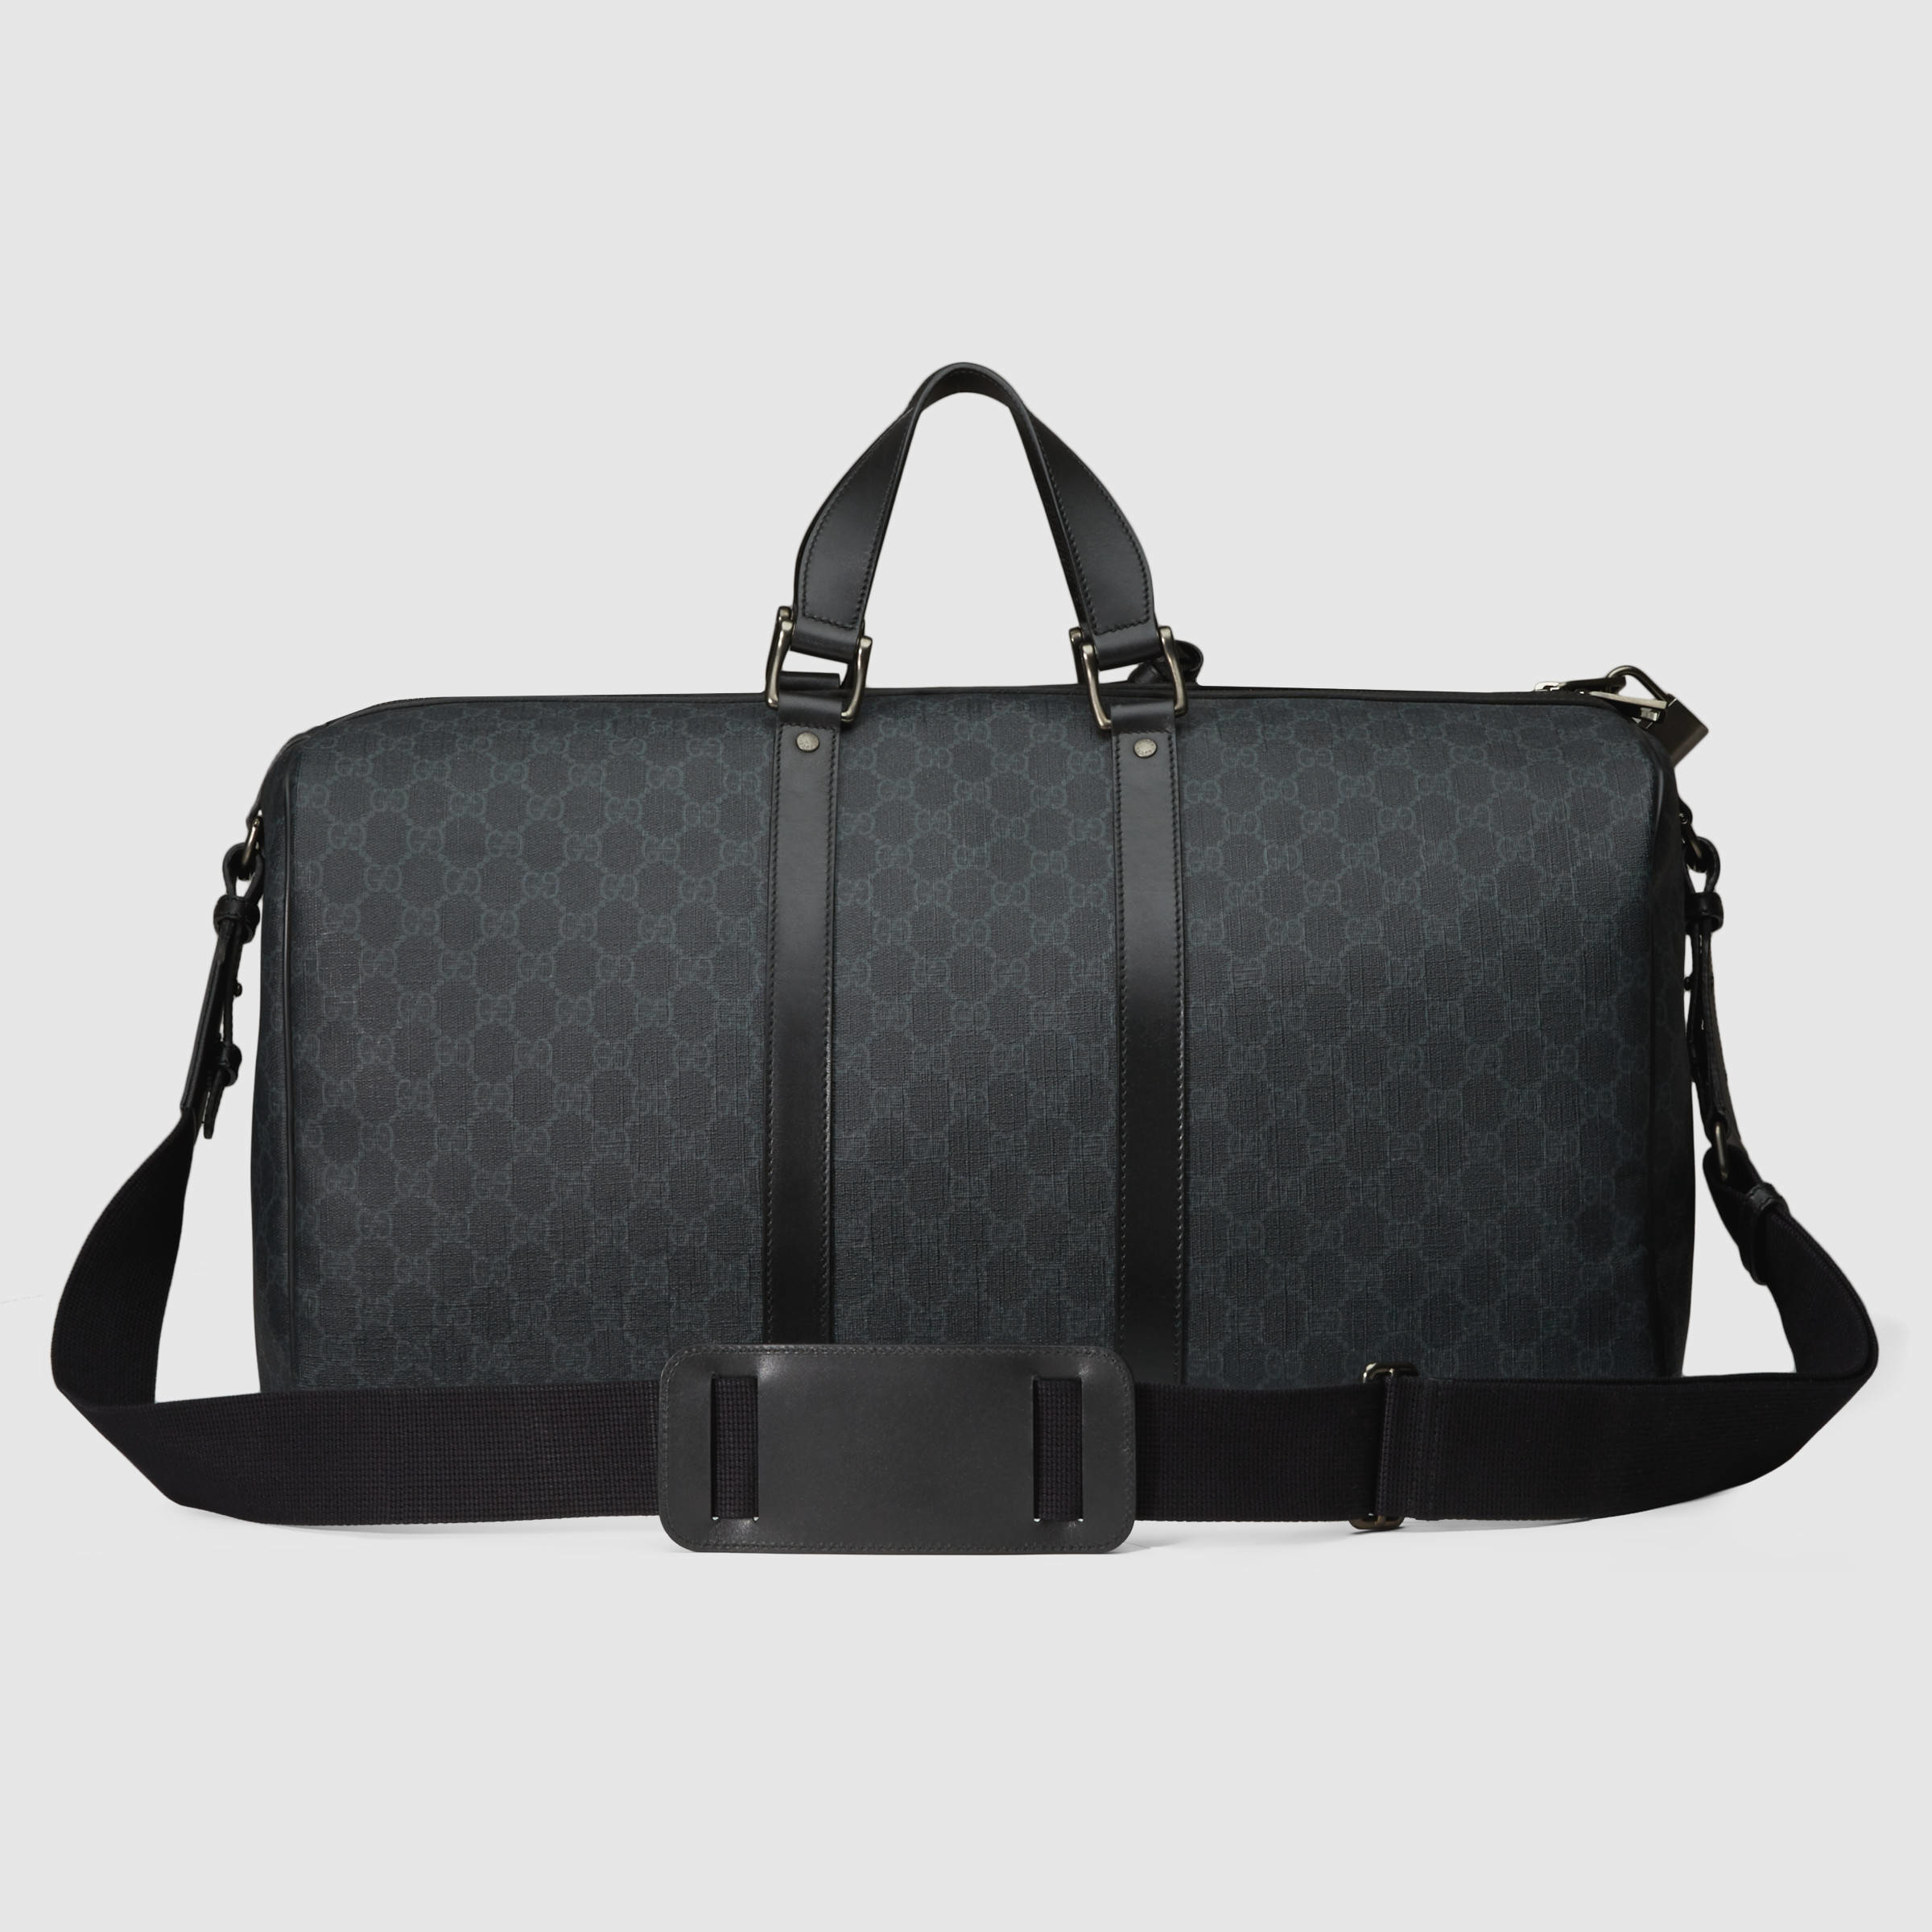 Gucci Gg Supreme Canvas Carry-on Duffle Bag in Black for Men - Lyst